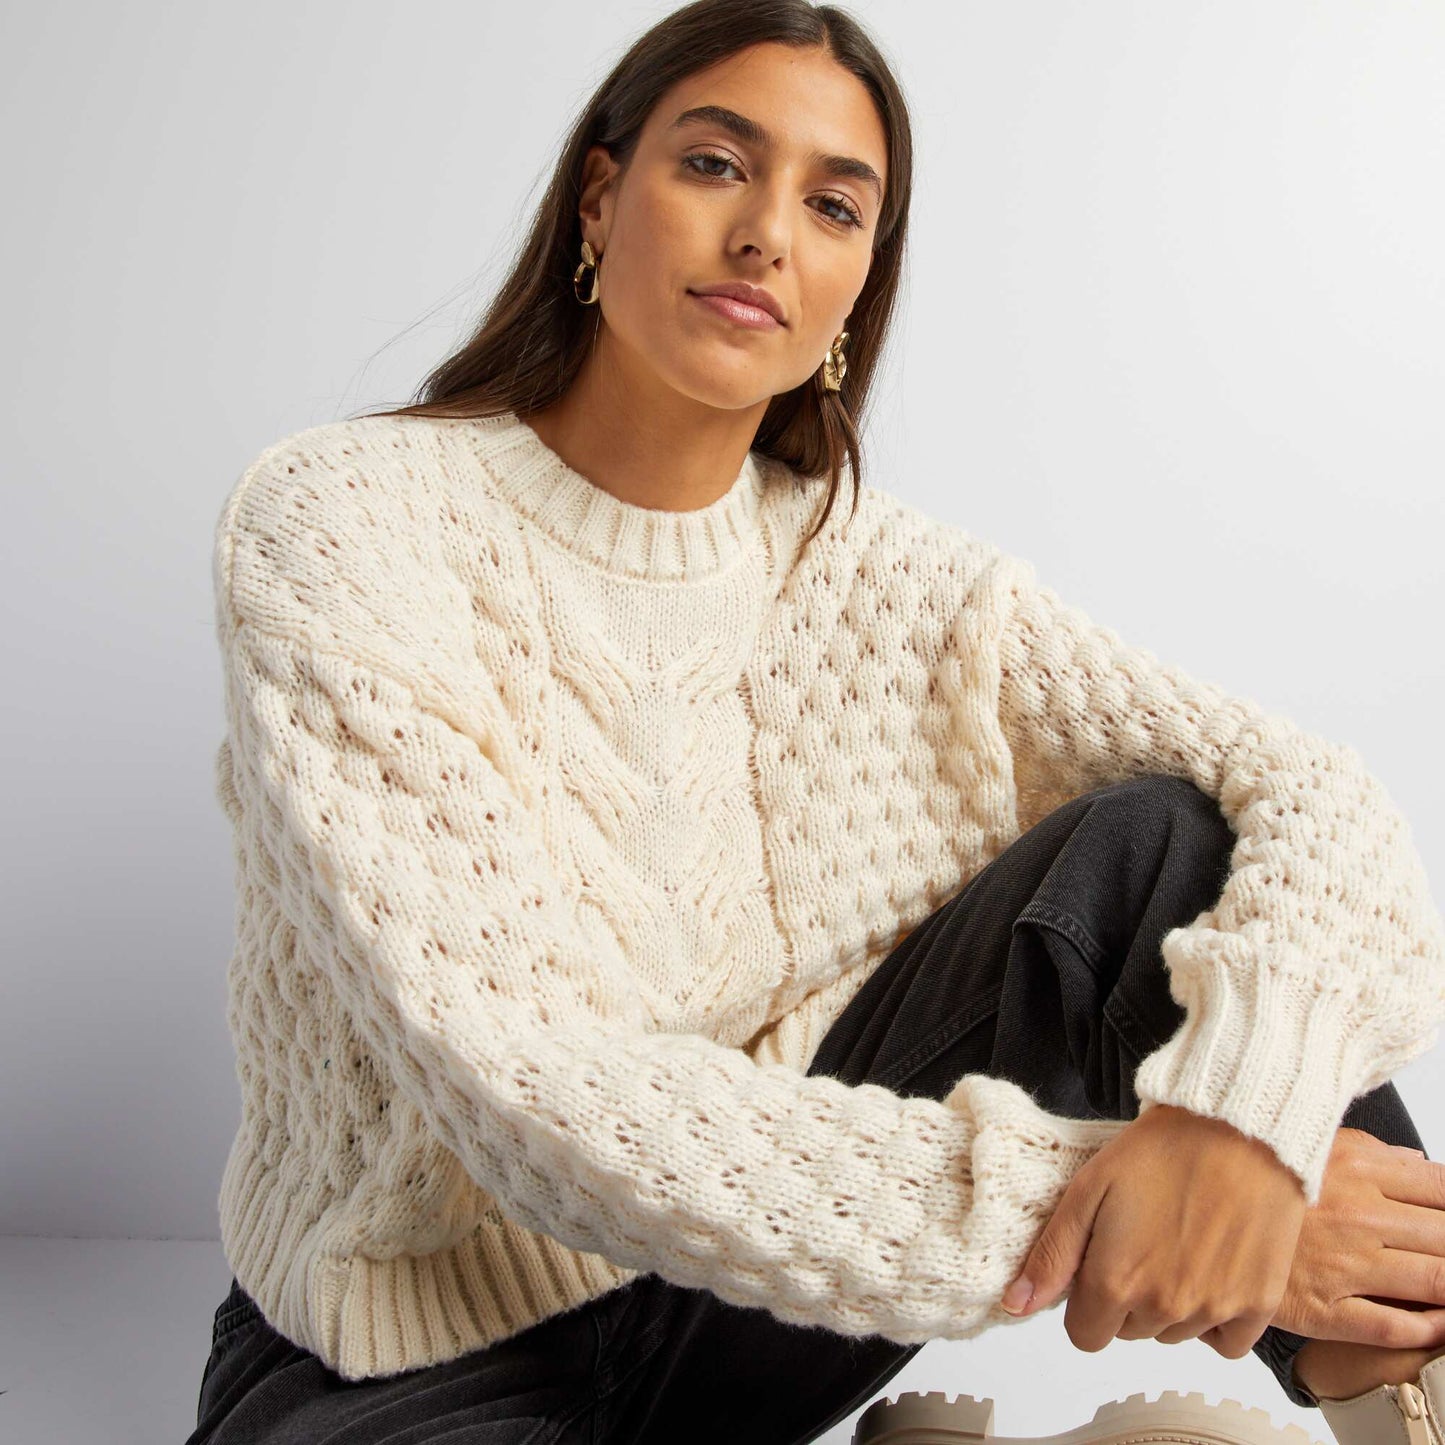 Woven knit sweater WHITE EGG